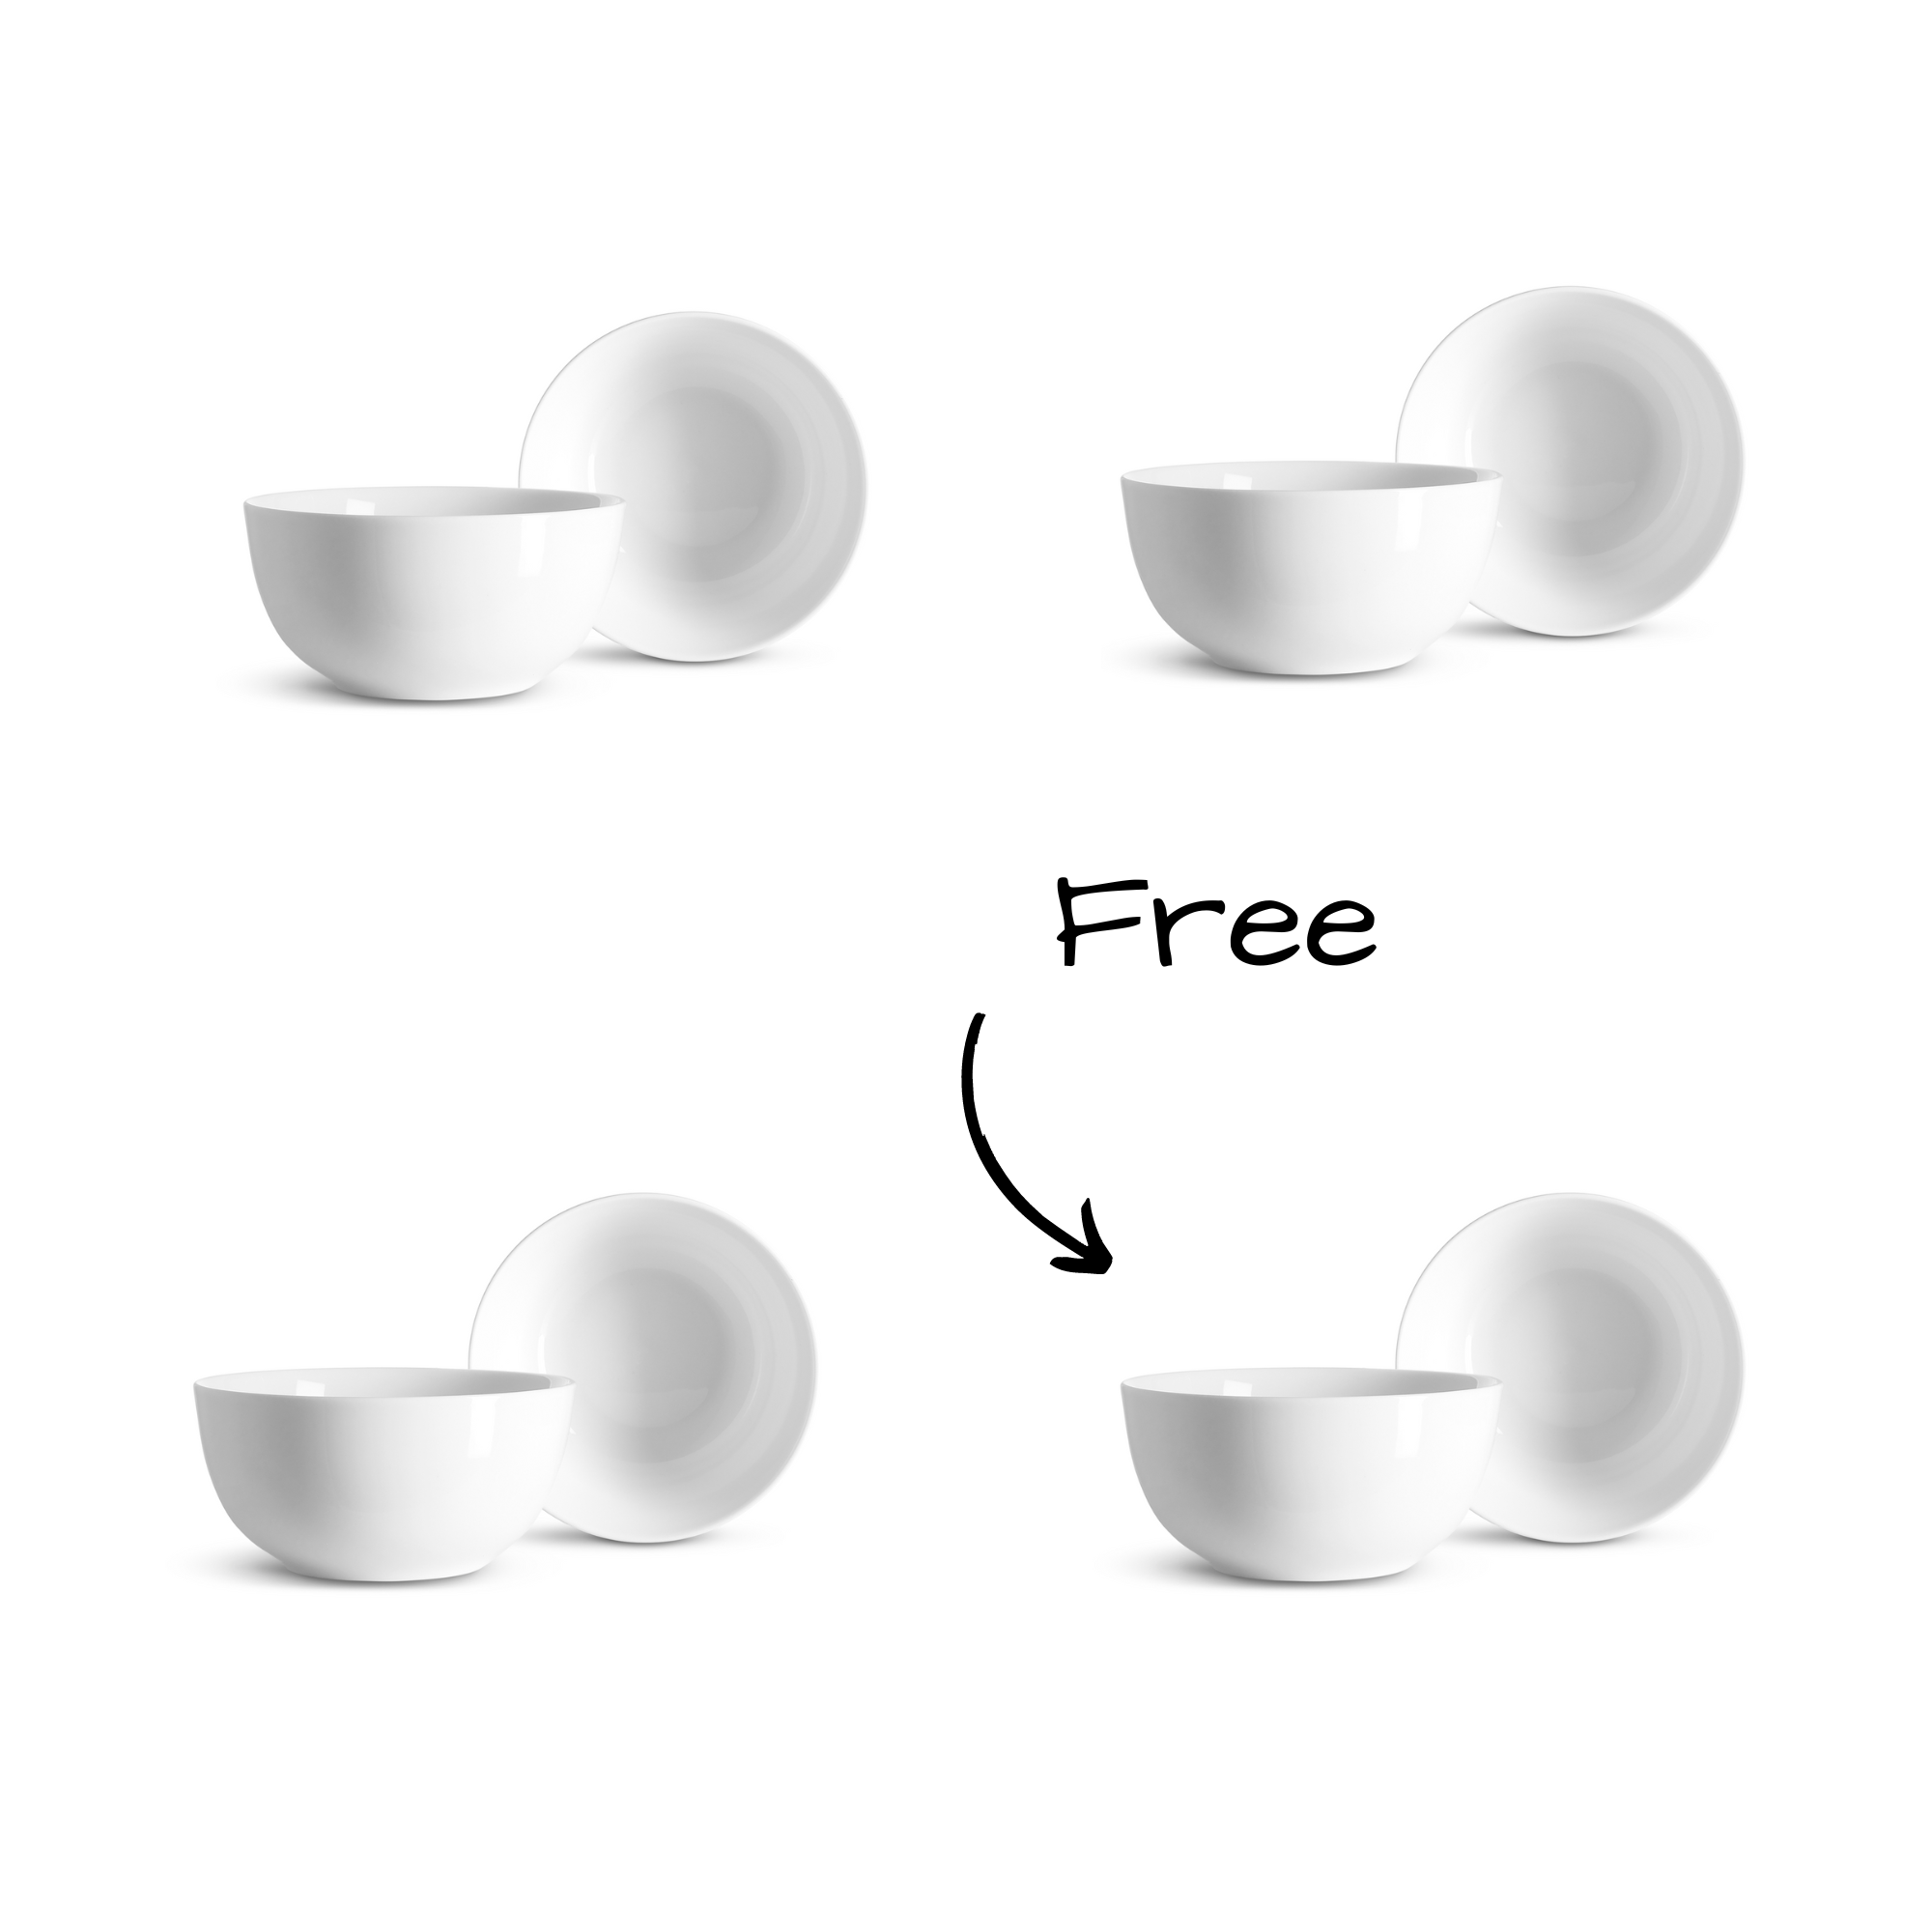 Buy 6 get 2 free! front view, Brandless cereal bowl in white porcelain